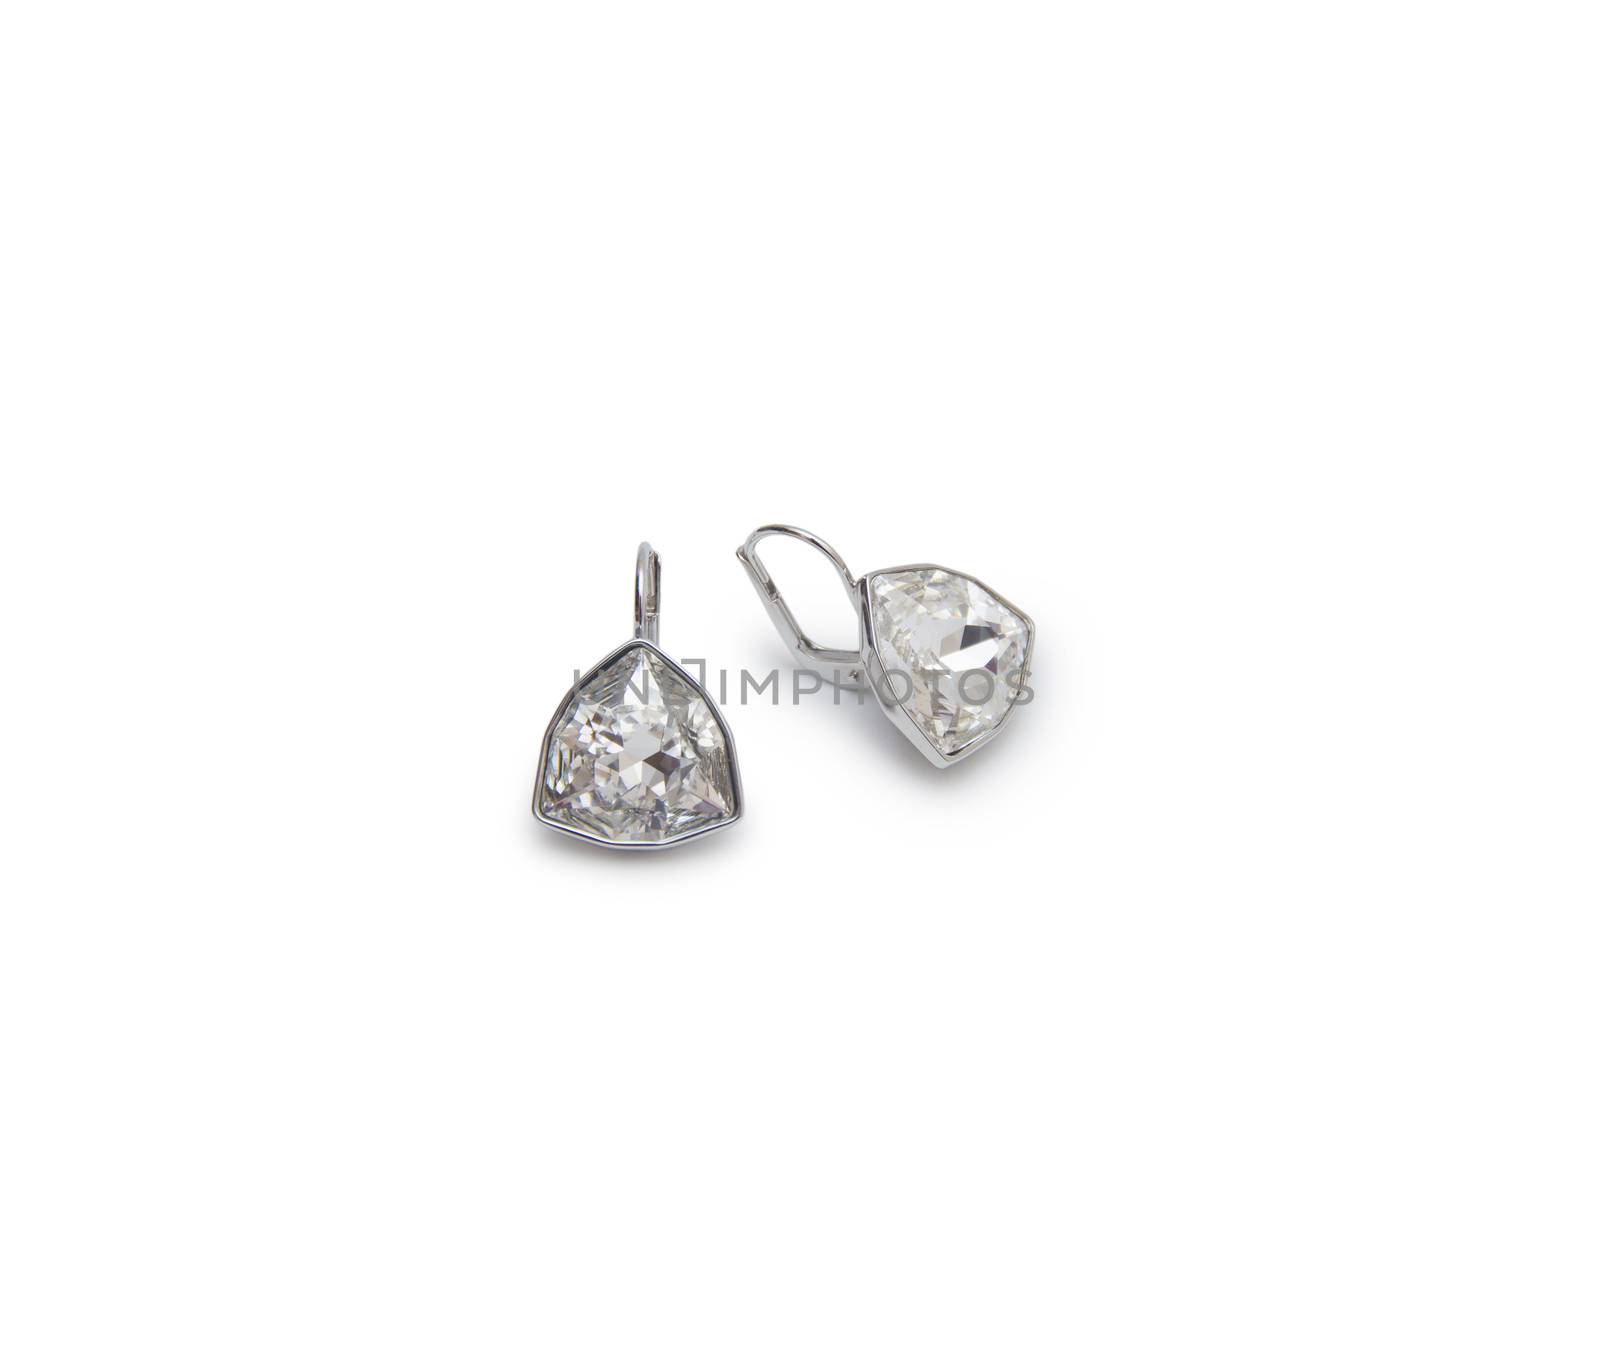 A couple of diamond earrings by cocoo